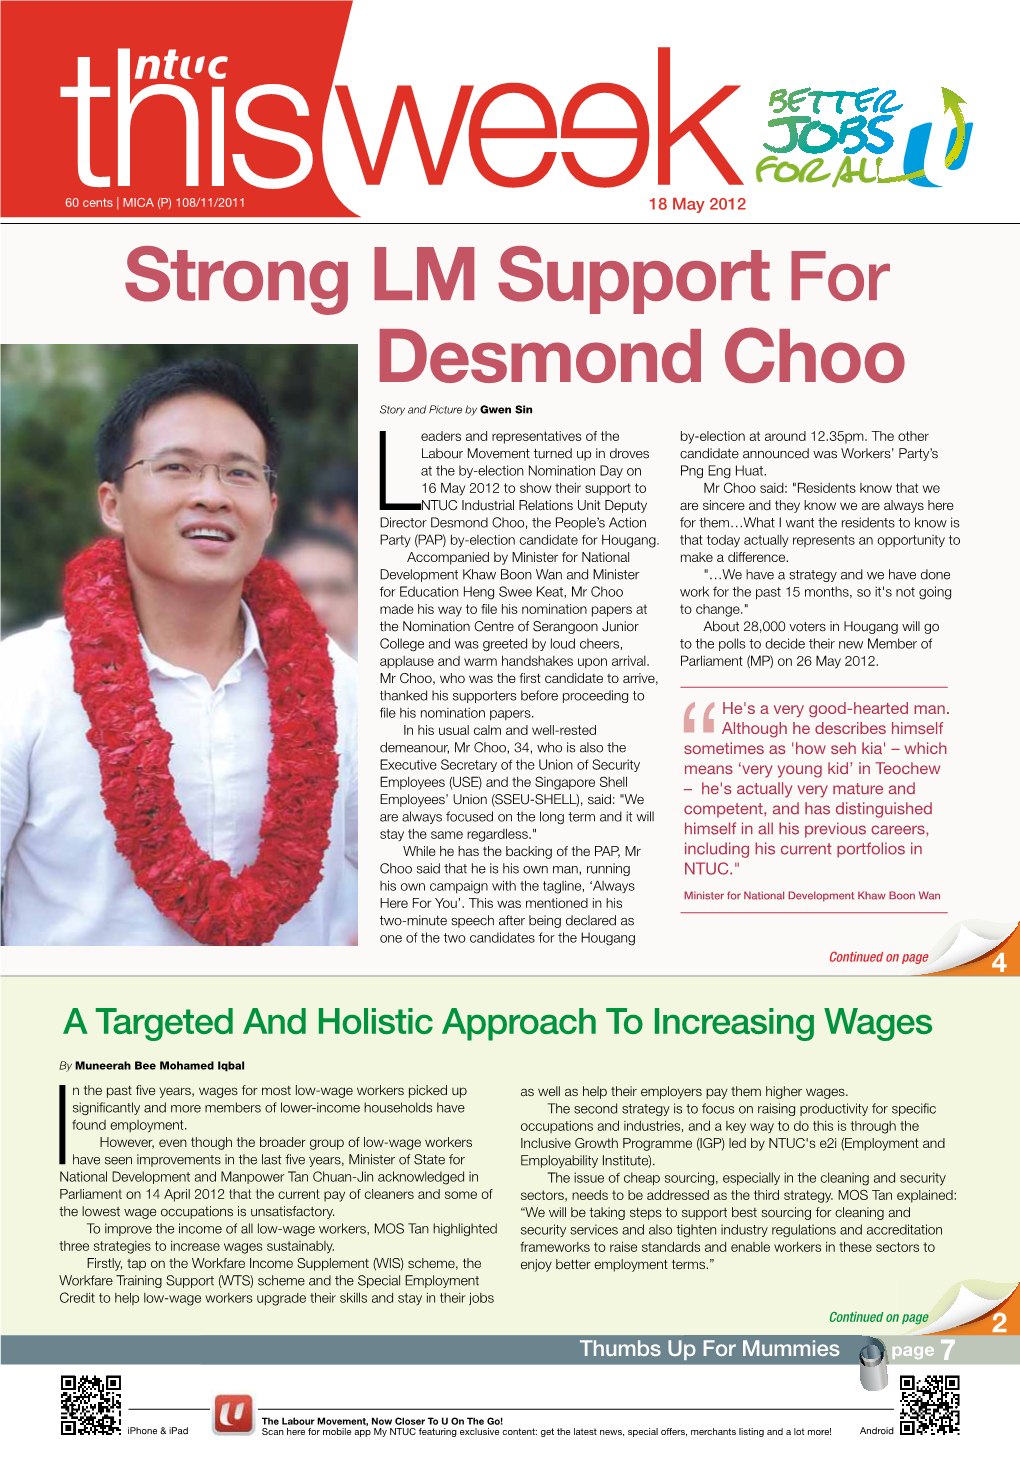 Strong LM Support for Desmond Choo